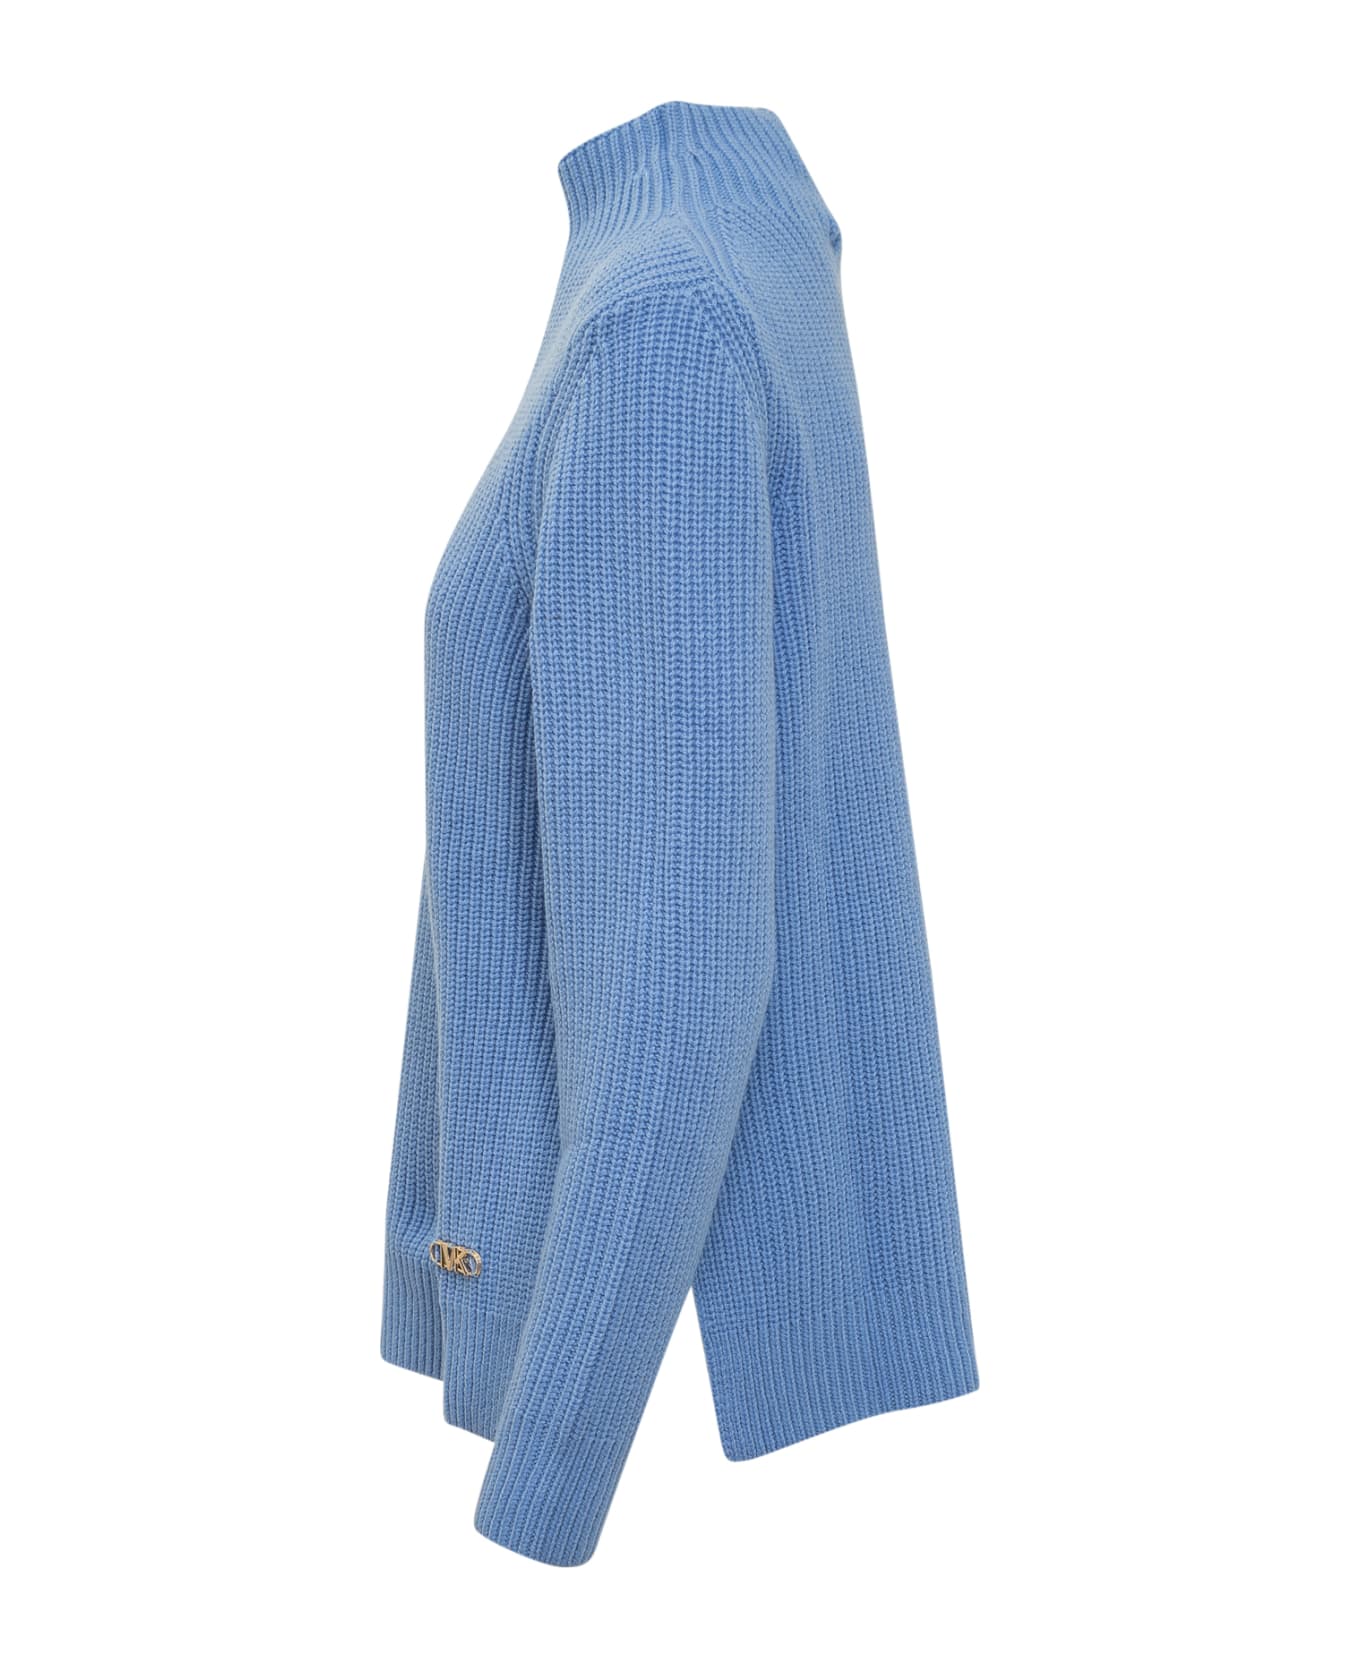 MICHAEL Michael Kors Wool And Cashmere Sweater - Light Blue